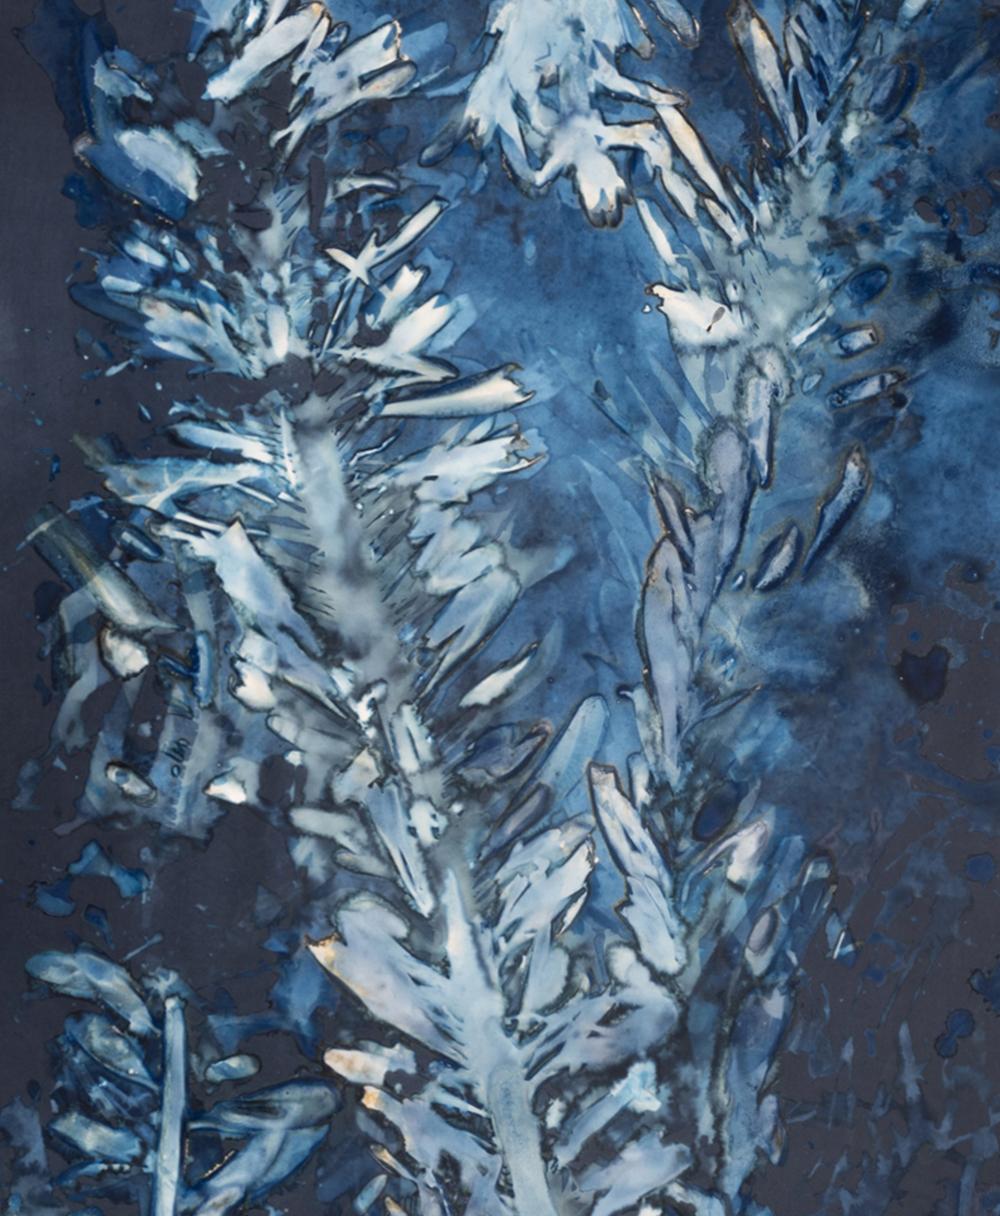 Laminariales XVIII. From the series Bosque Cyanotype photograph - Abstract Photograph by Paola Davila